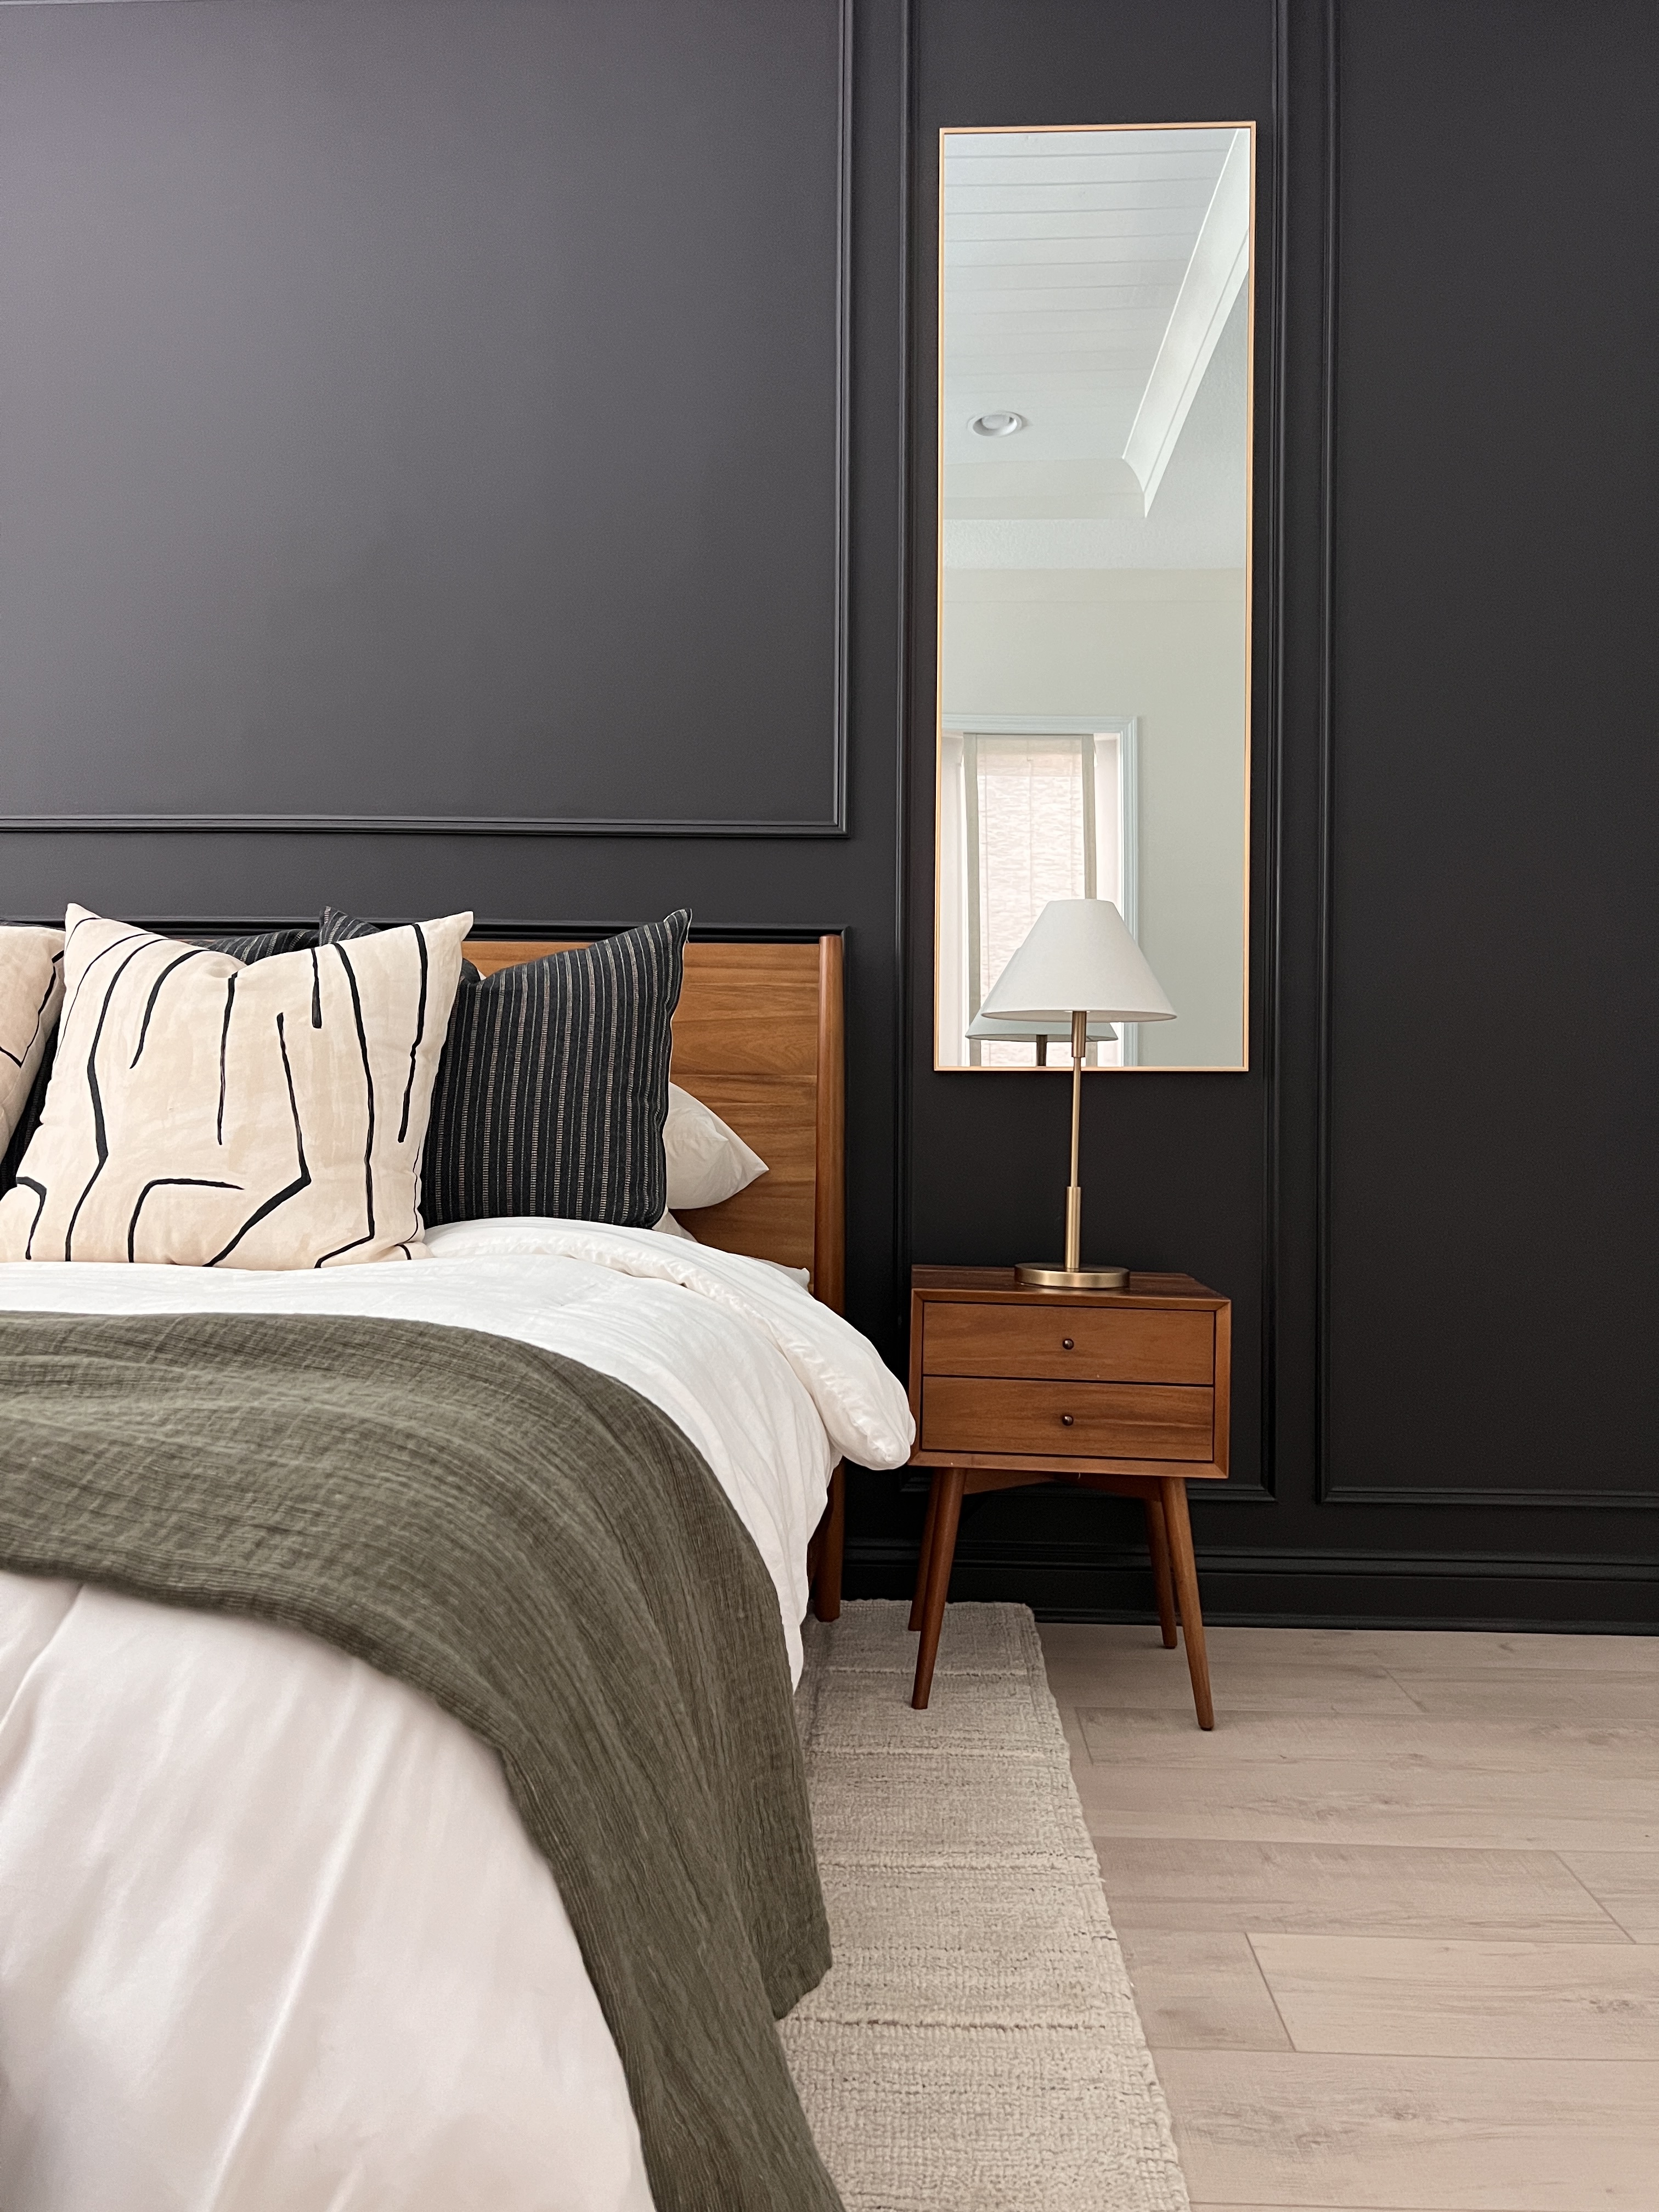 This moody bedroom accent wall was designed by Welcome Home Styling.